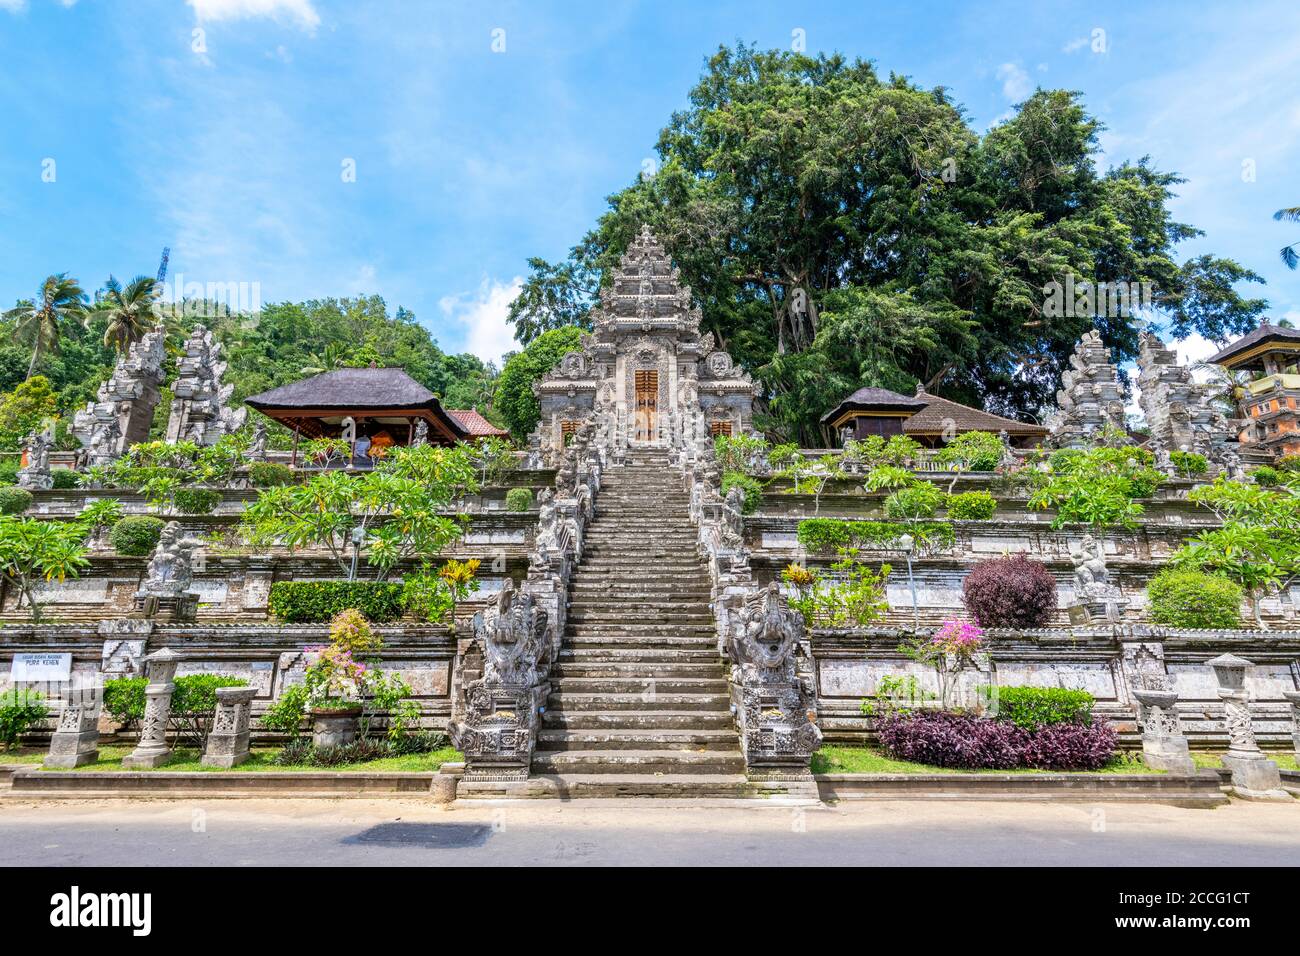 Pura Kehen or Kehen temple is a Balinese Hindu temple located in Cempaga, Bali. The temple is set on the foot of a wooded hill, about 2 kilometres (1. Stock Photo